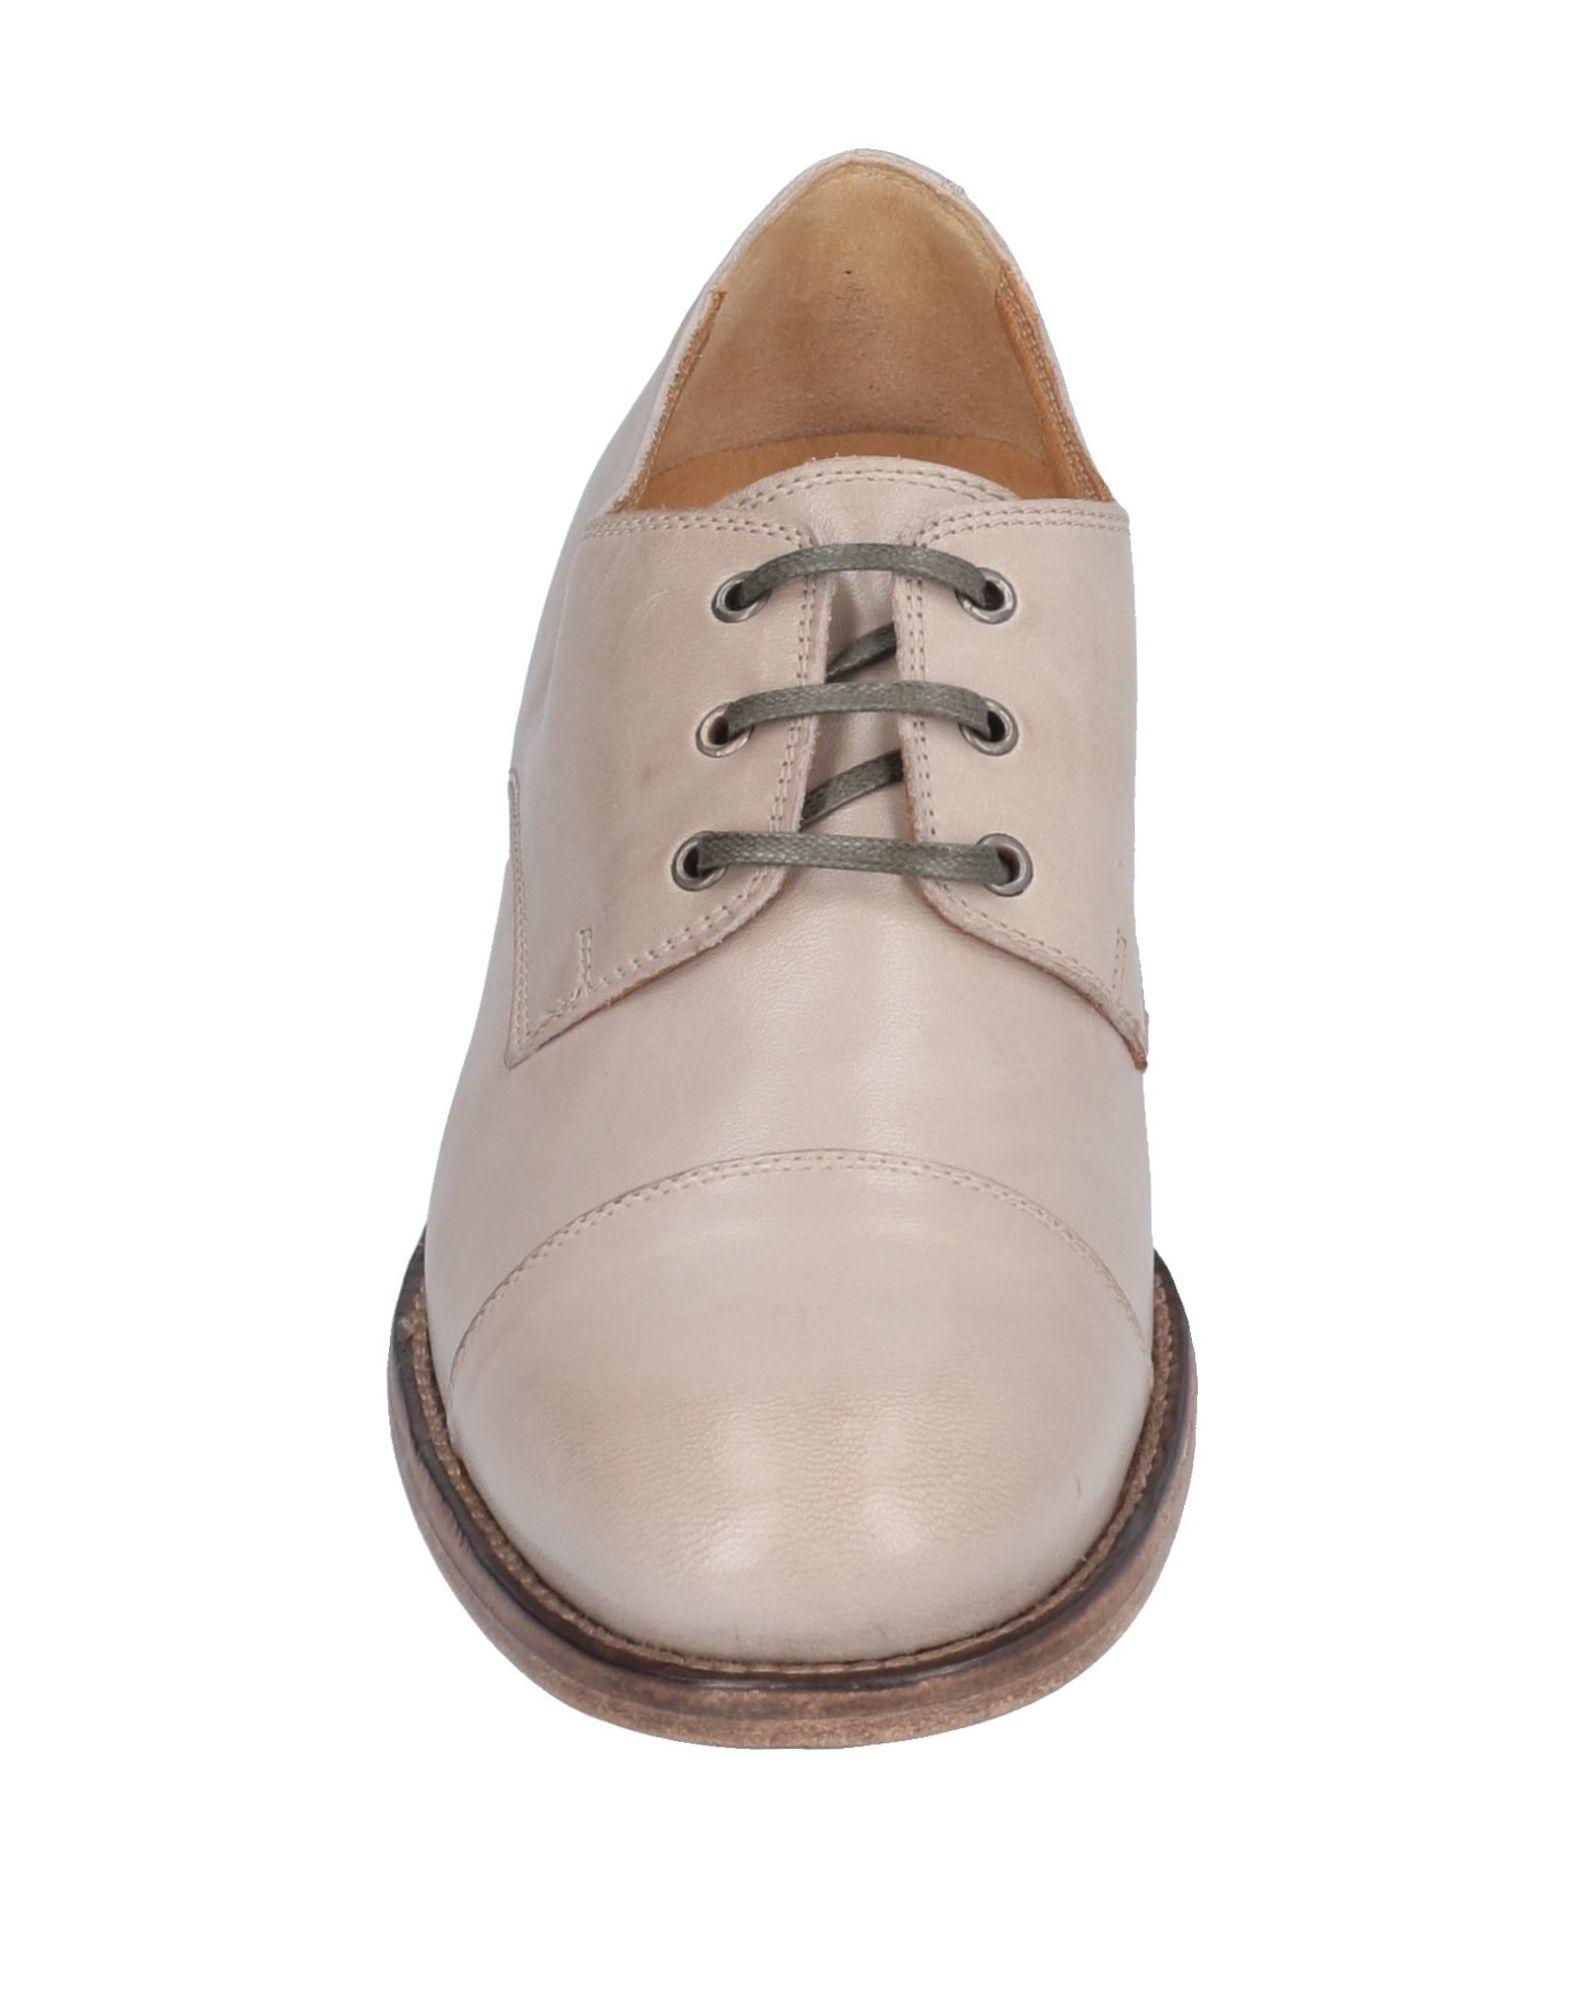 Alberto Fermani Leather Lace-up Shoe in Beige (Natural) - Lyst